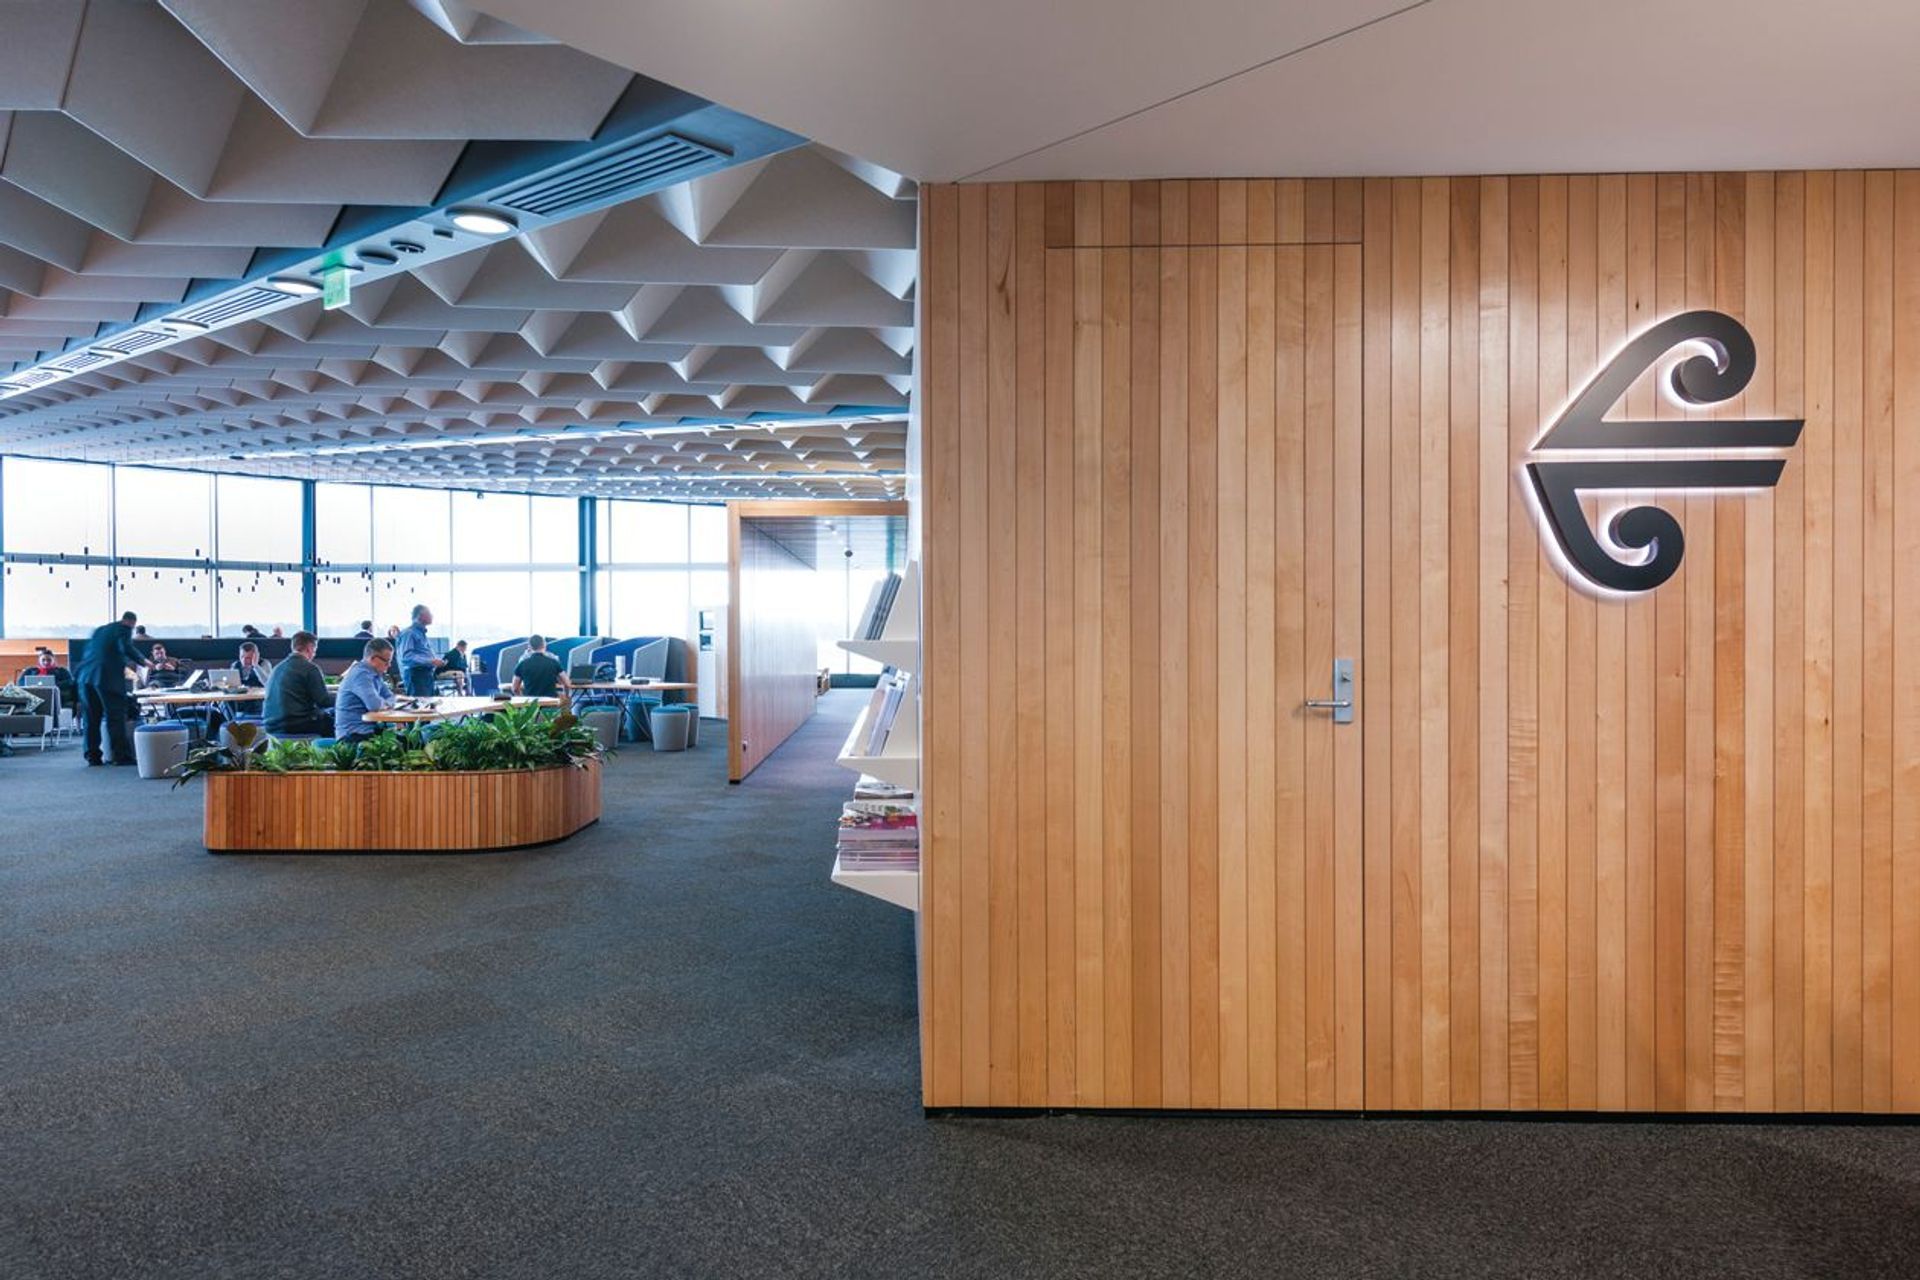 Southland Maple Beech accents bring warmth to the Koru Lounge in Christchurch.